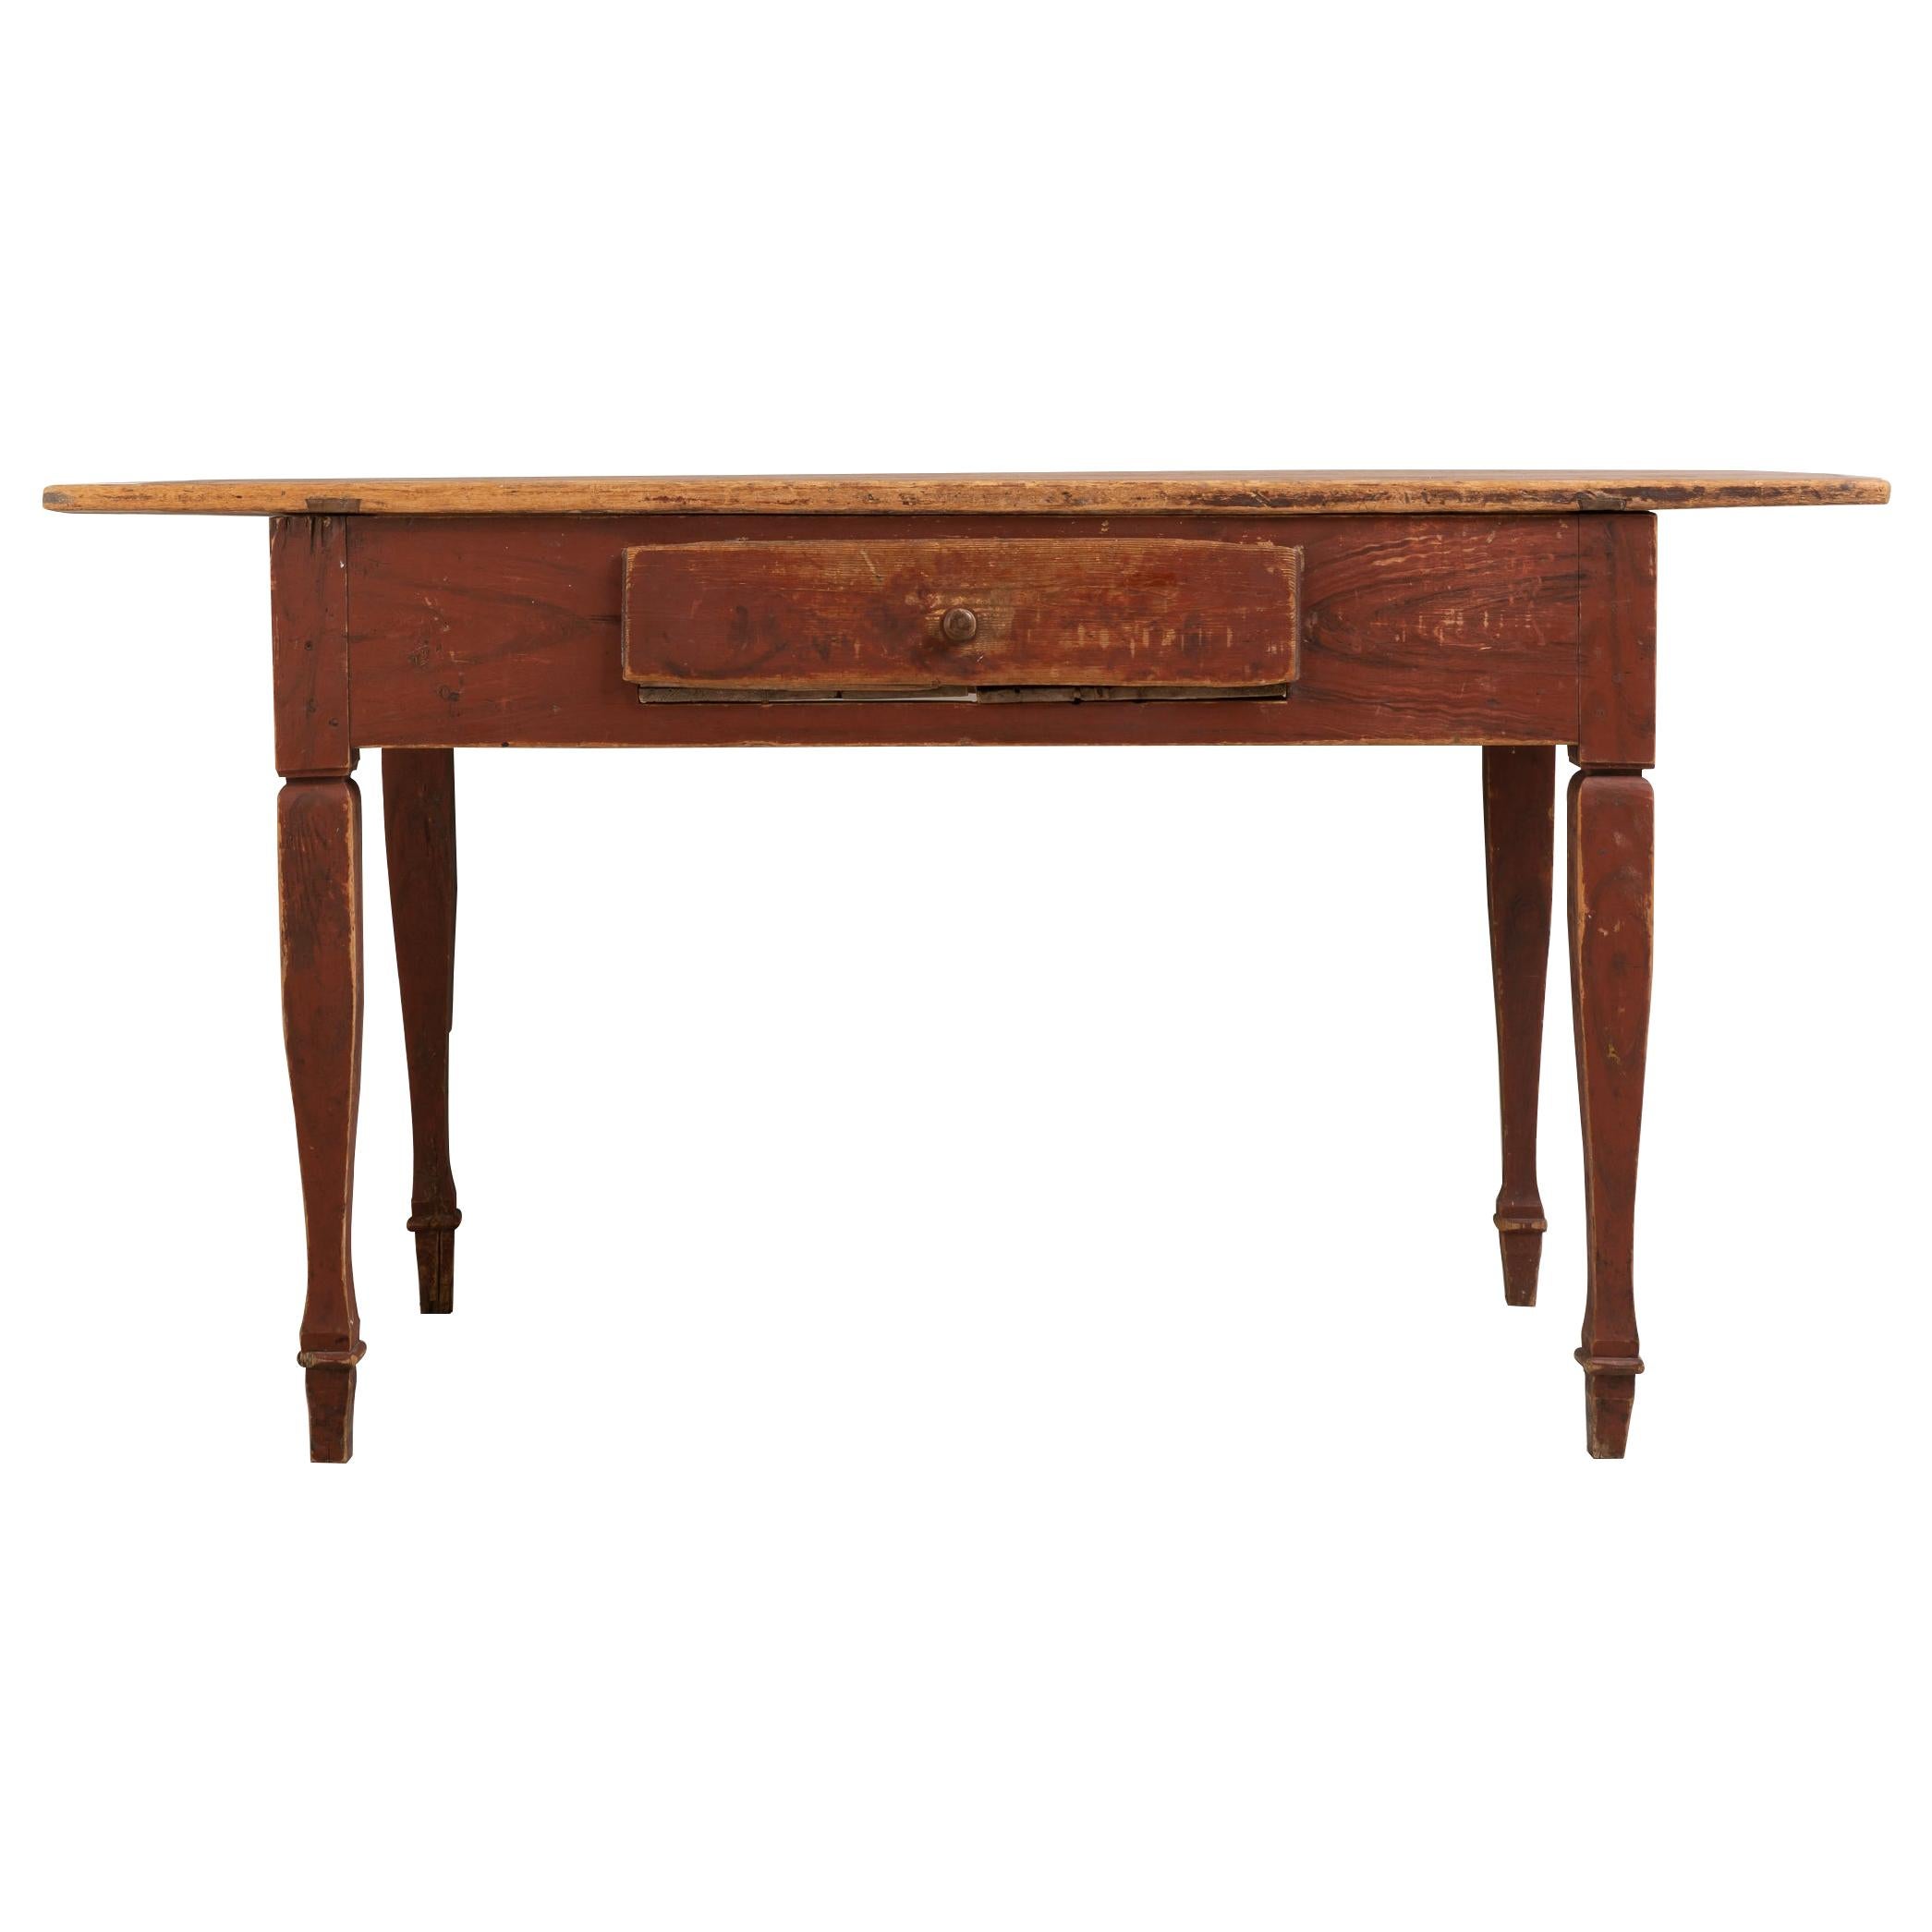 Late 18th Century Gustavian Styled Work Table